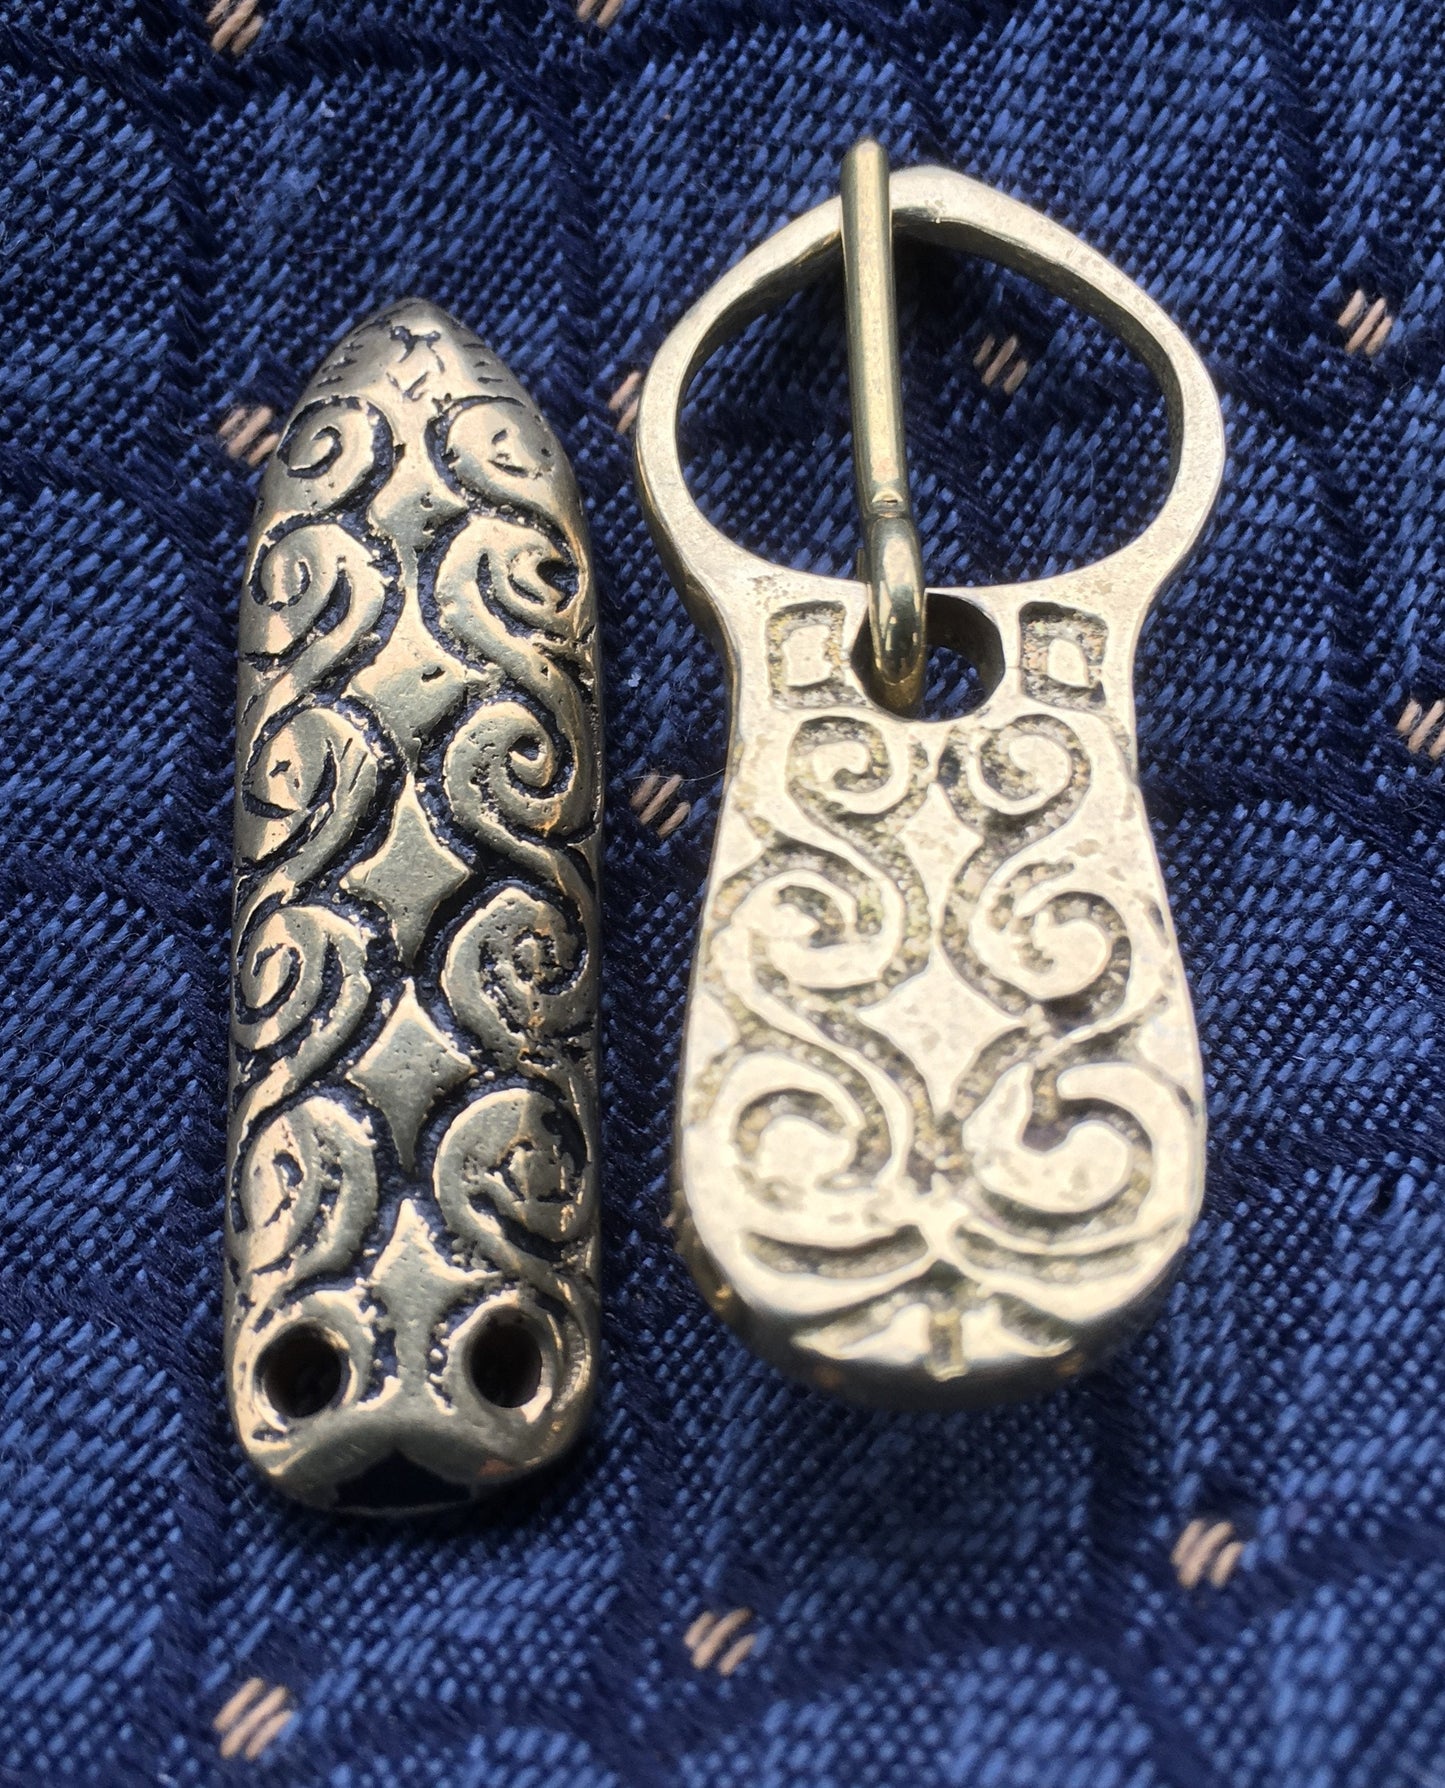 Viking buckle and strap end with a swirling pattern